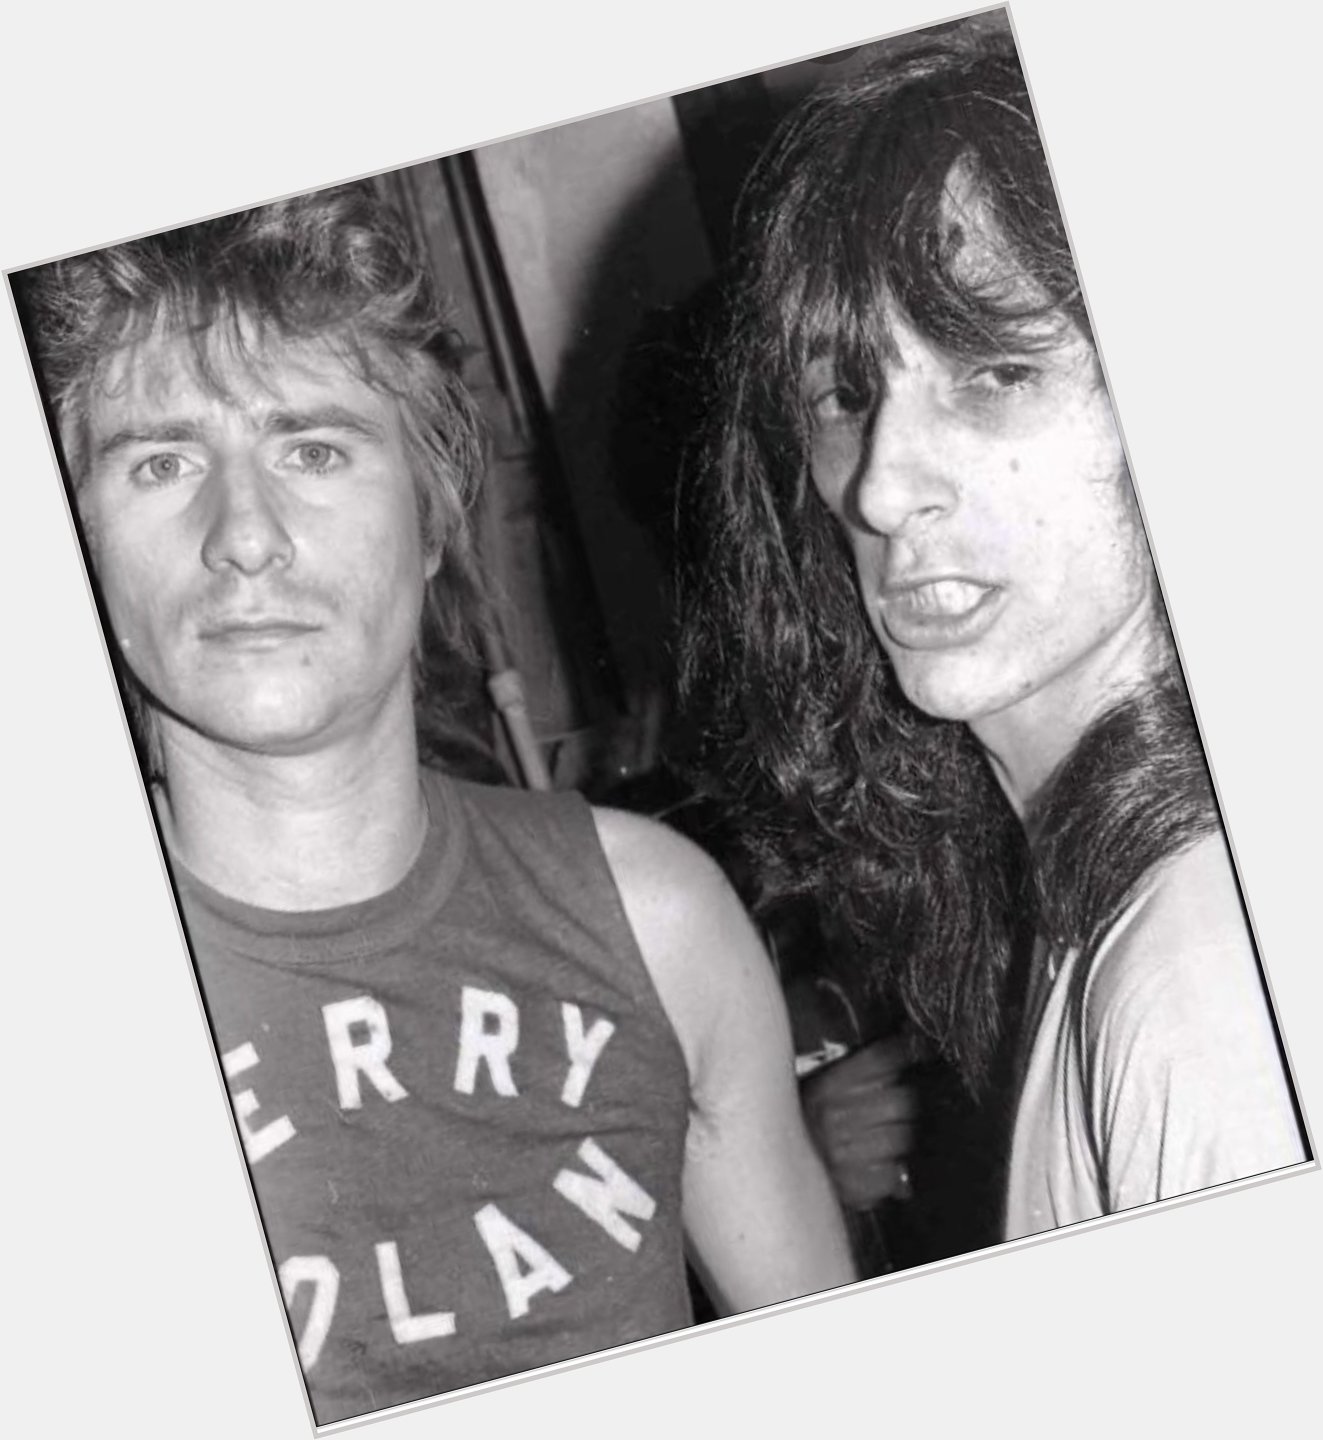 Happy Birthday to Jerry Nolan legendary drummer of the New York Dolls and Heartbreakers just to name a couple. 